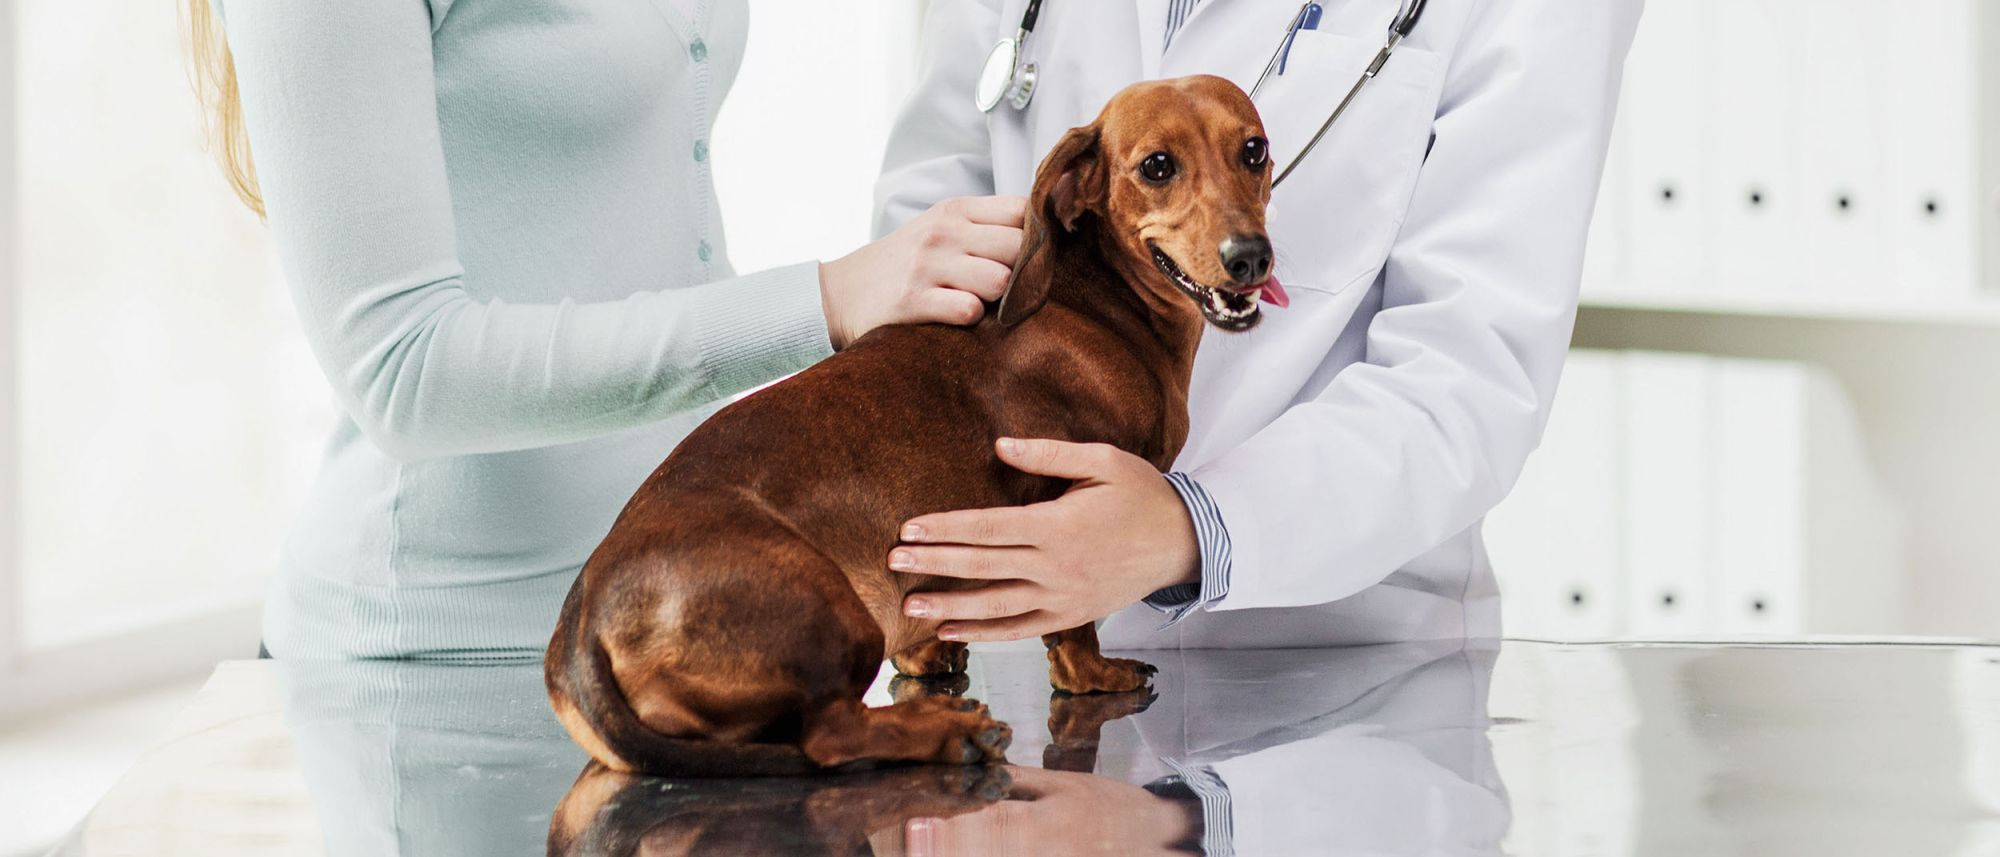 Adult Dachshund sitting on an examination table while owner speaks to a vet This image ALT text is: 